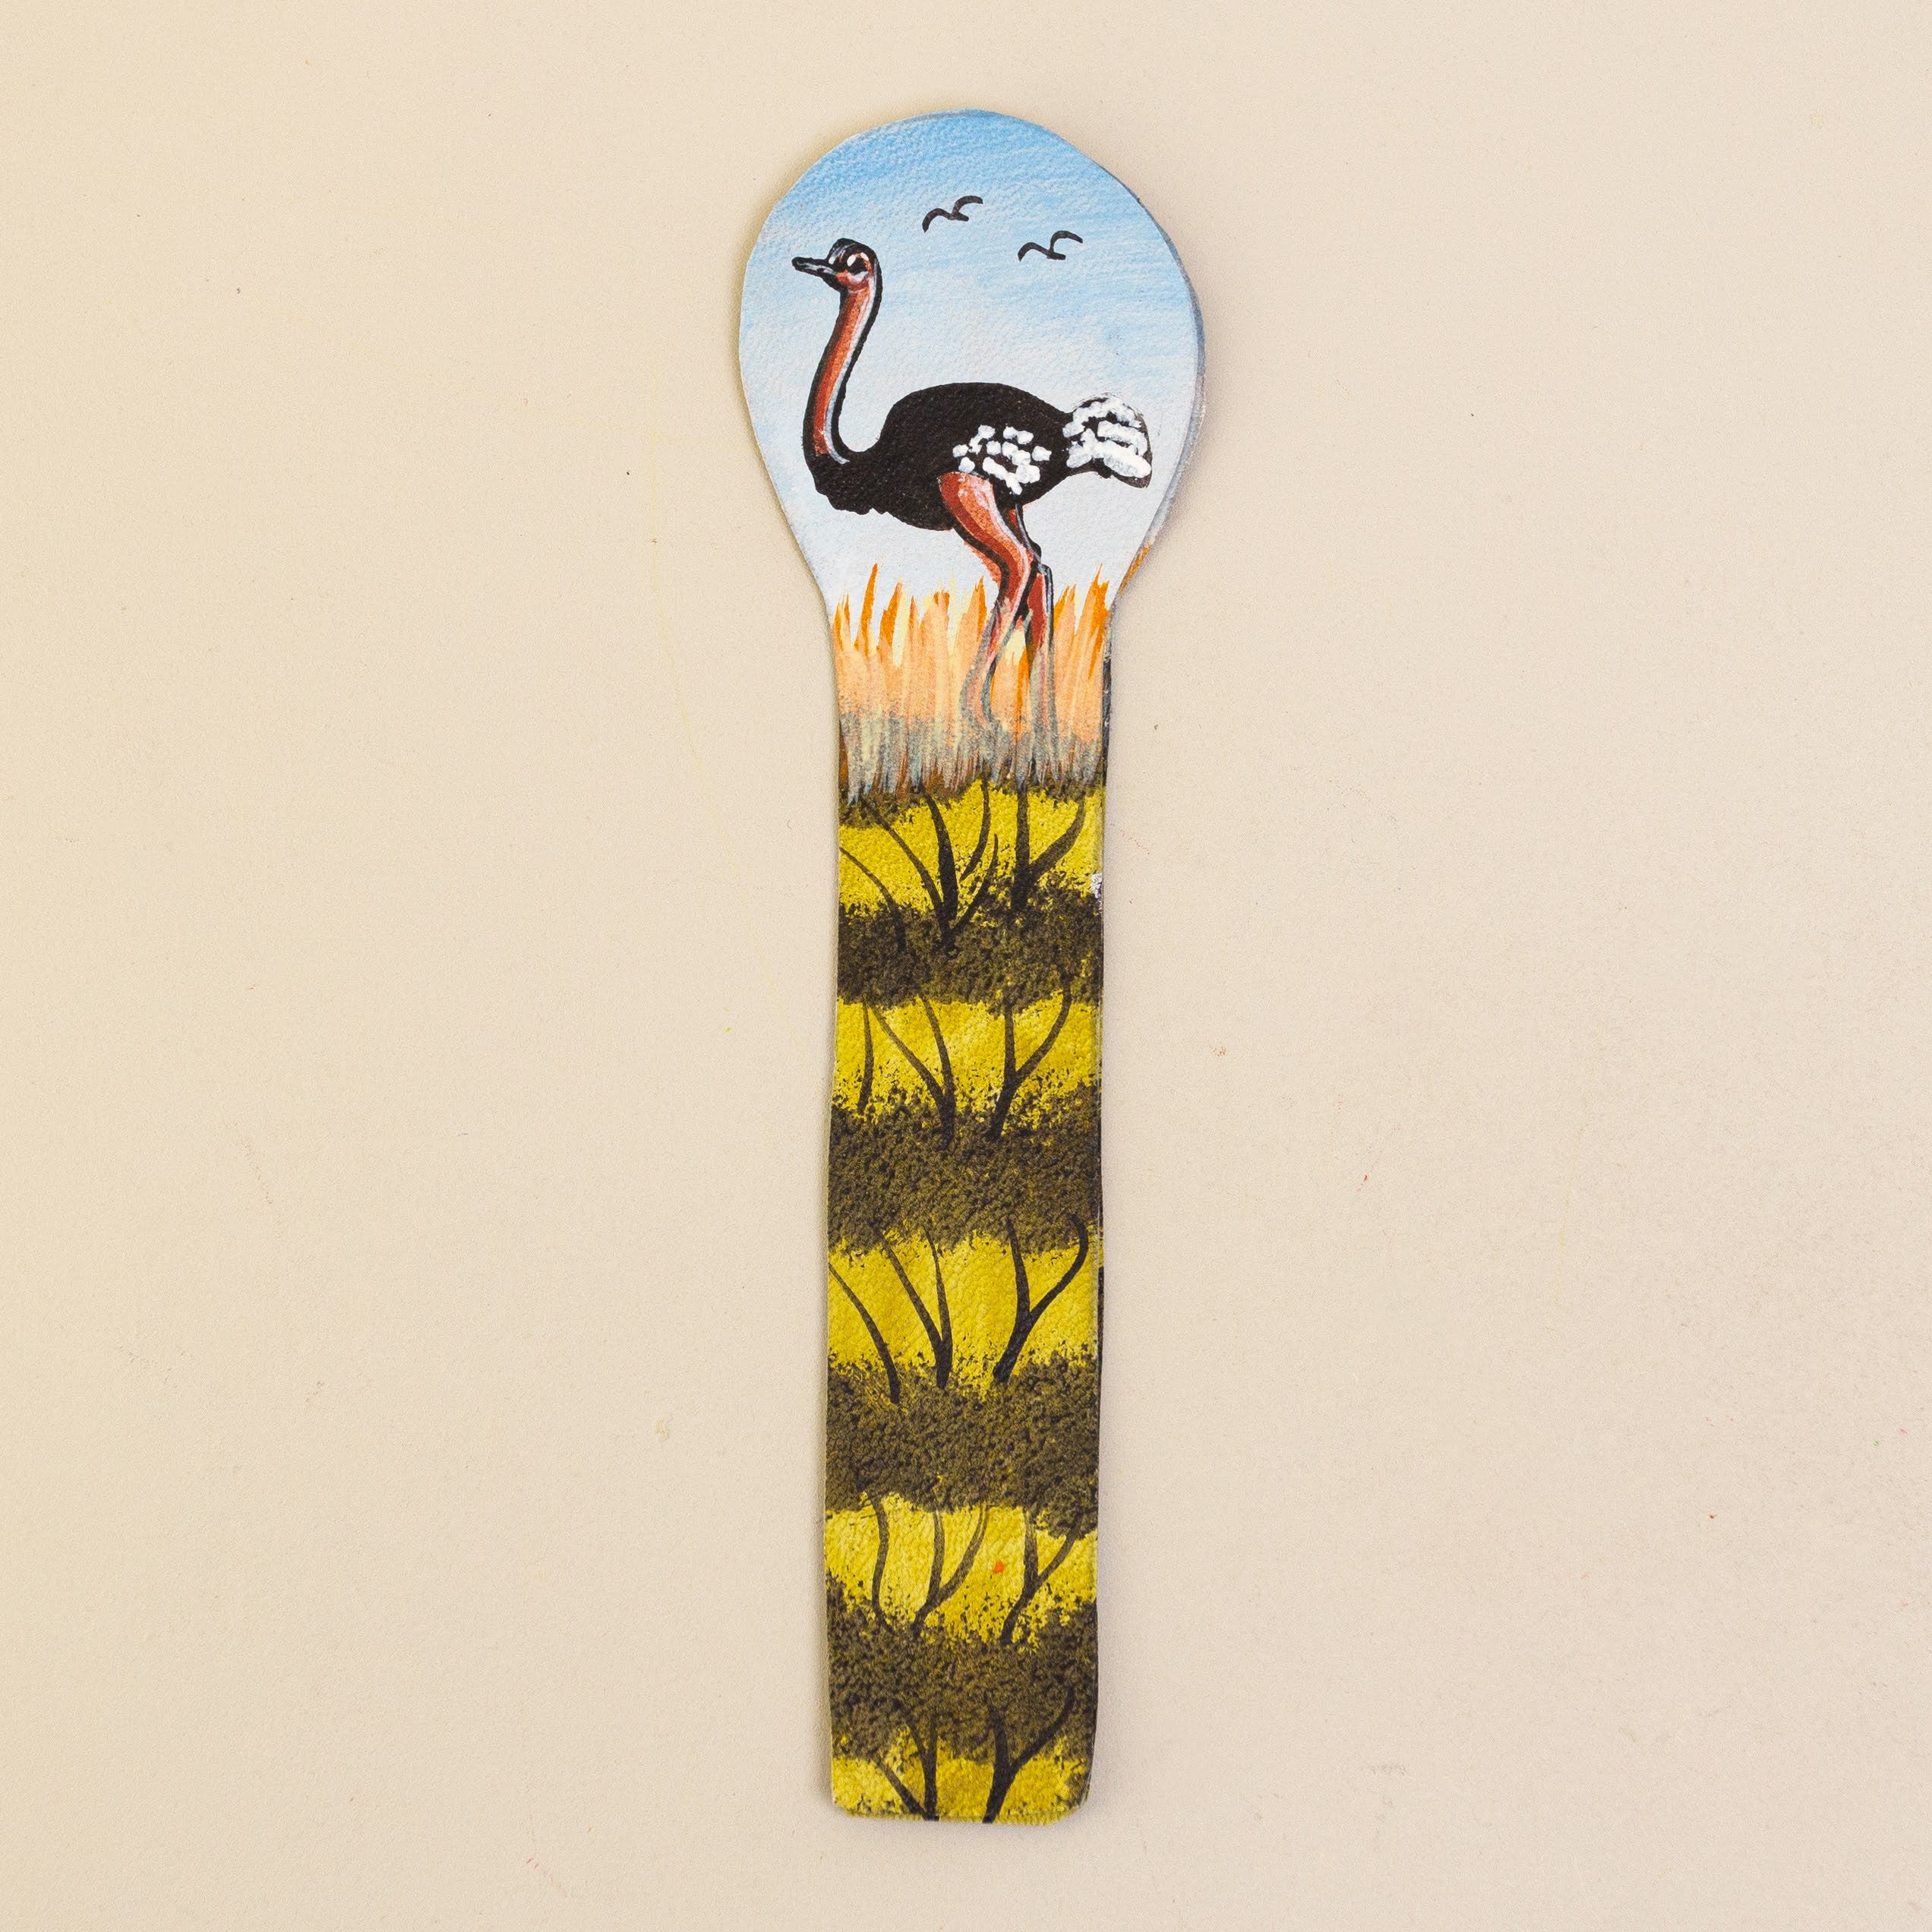 Hand Painted Leather Bookmarks - Kenyan materials and design for a fair trade boutique